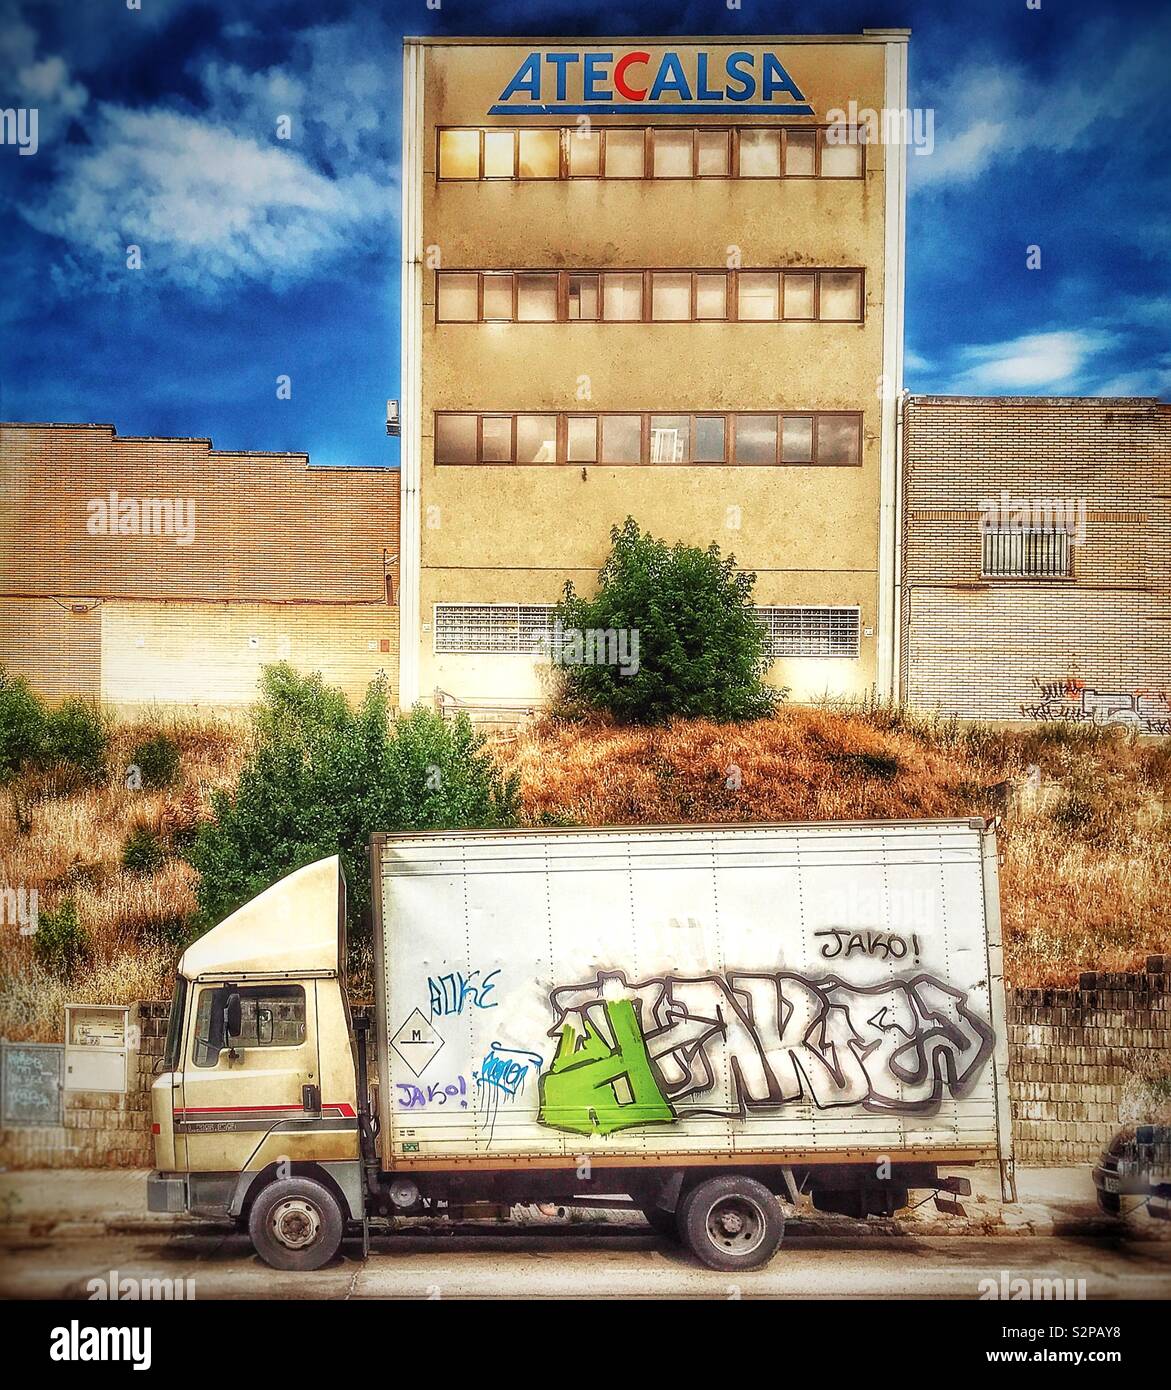 A white lorry and its trailer daubed with graffiti, parked in front of towering buildings on an industrial estate. Stock Photo